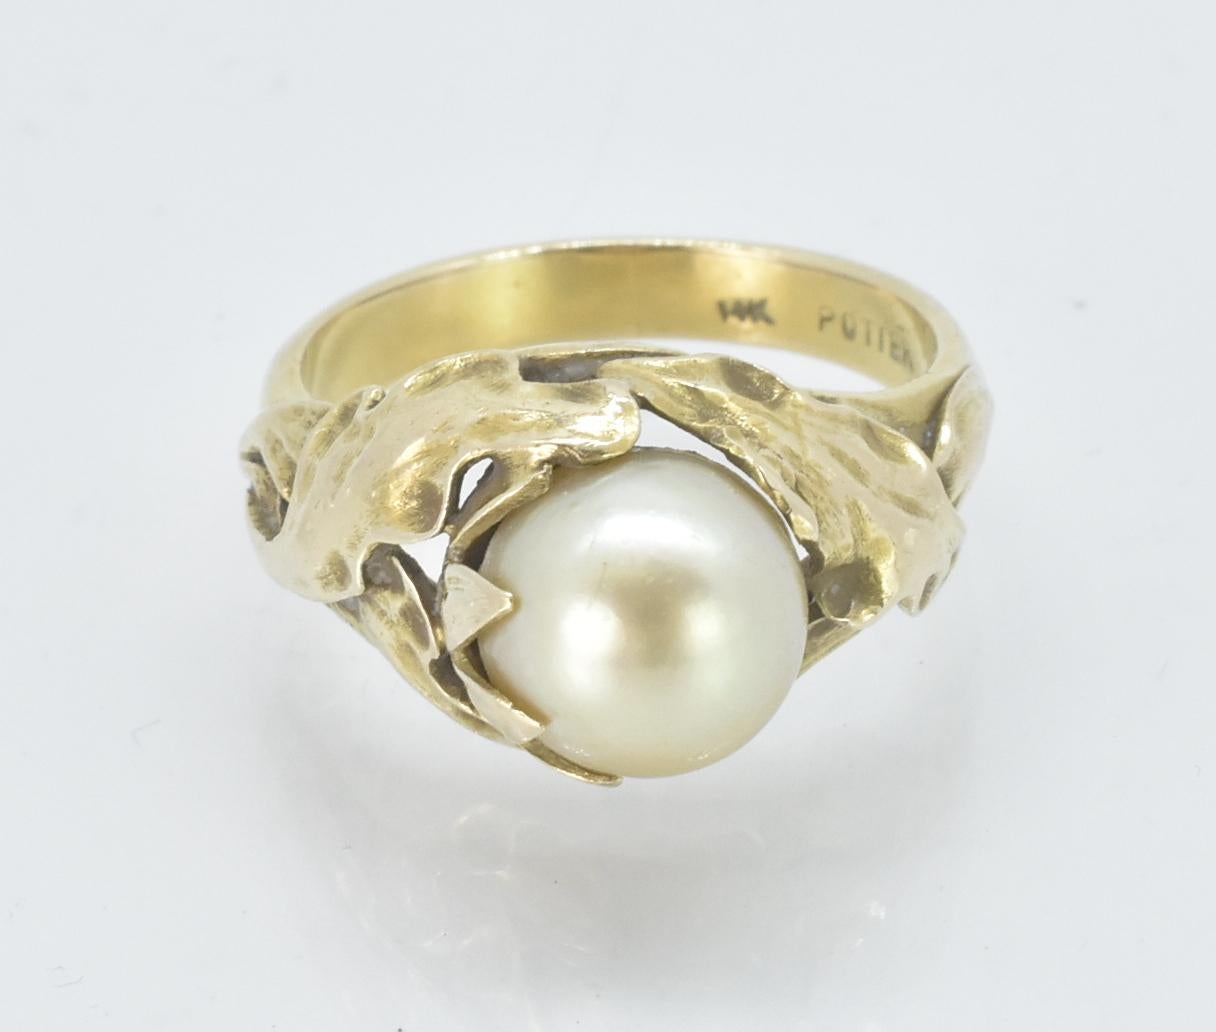 14K Yellow gold pearl ring by Potter & Mellon. 8.5mm Pearl organic form. 14K Yellow Gold with leaf design around the pearl. Ring size 7.25